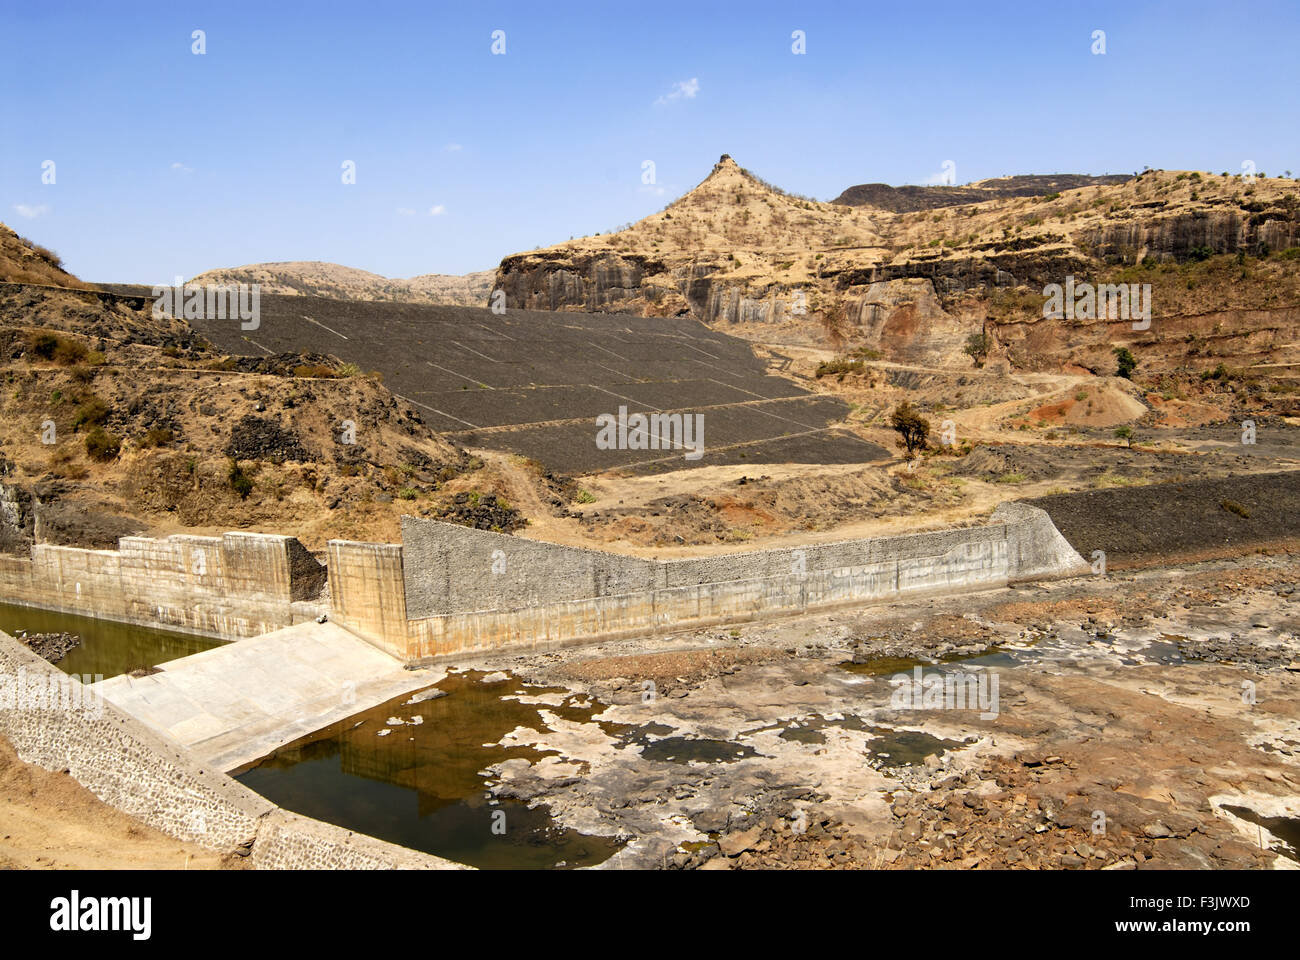 Earthen dam with stone pitching constructed between rock mountains Chilhewadi village Otur Junnar Pune maharashtra india asia Stock Photo